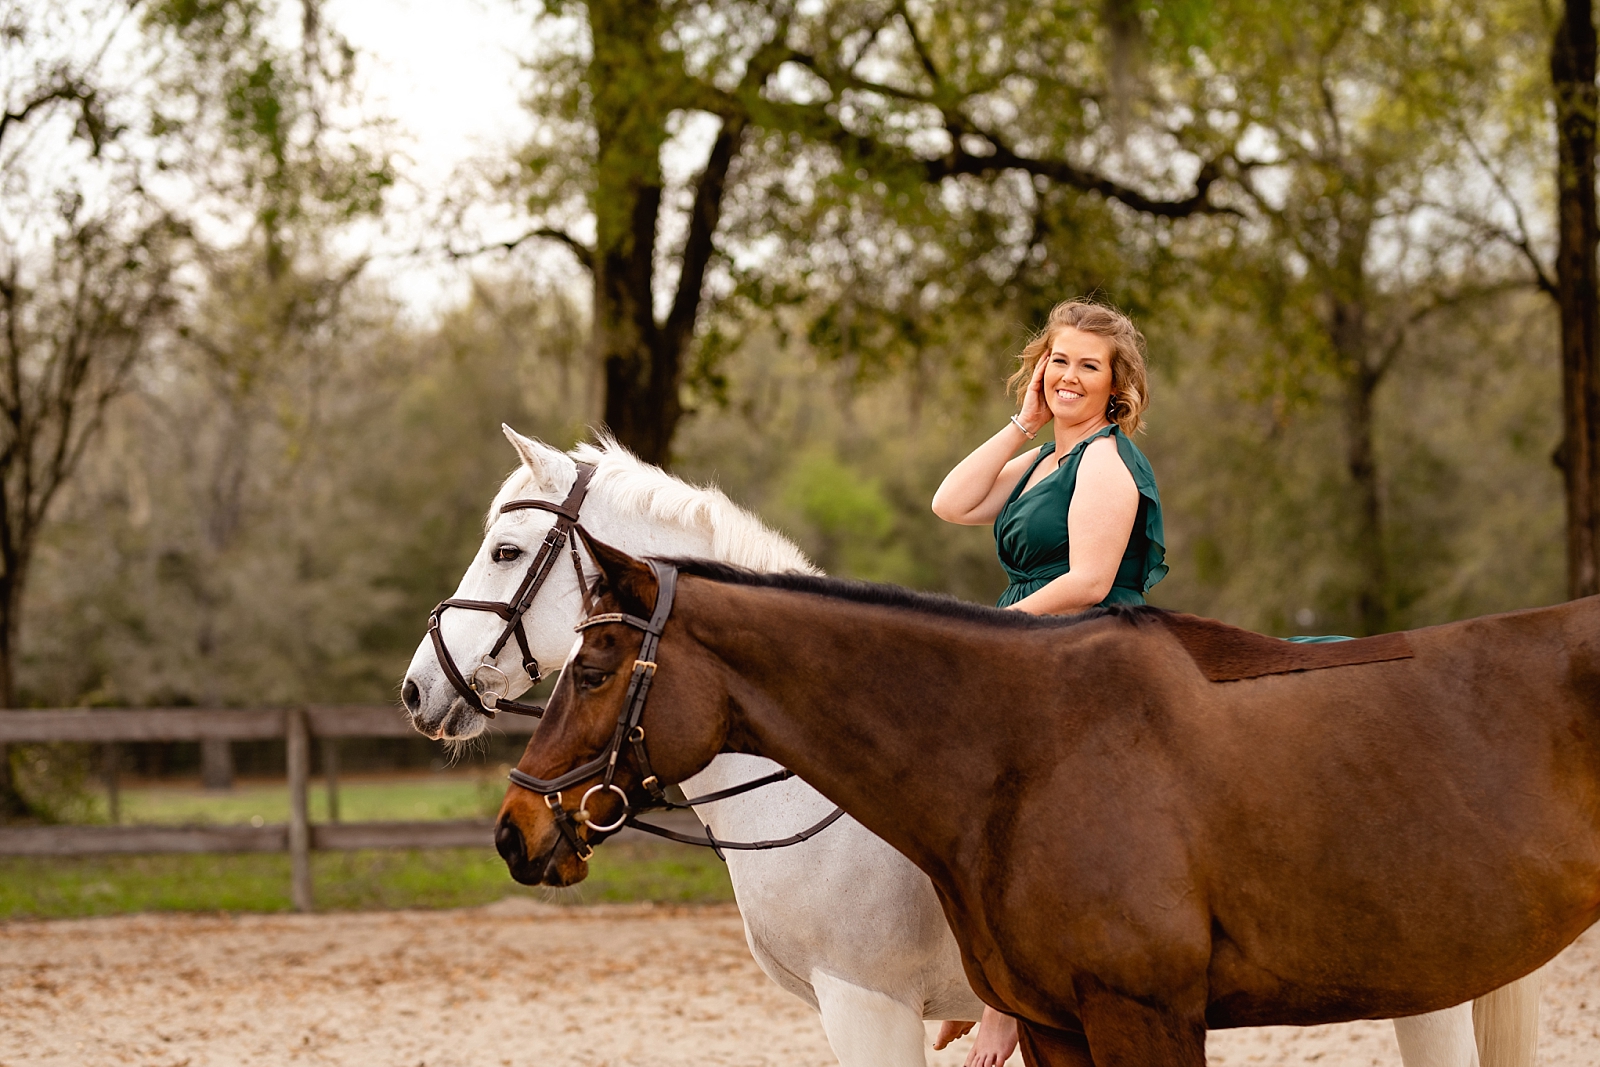 Game On Eventing. Photos of Eventer with her two horses near Ocala, Florida. Professional equine photographer near Ocala and Gainesville, FL.